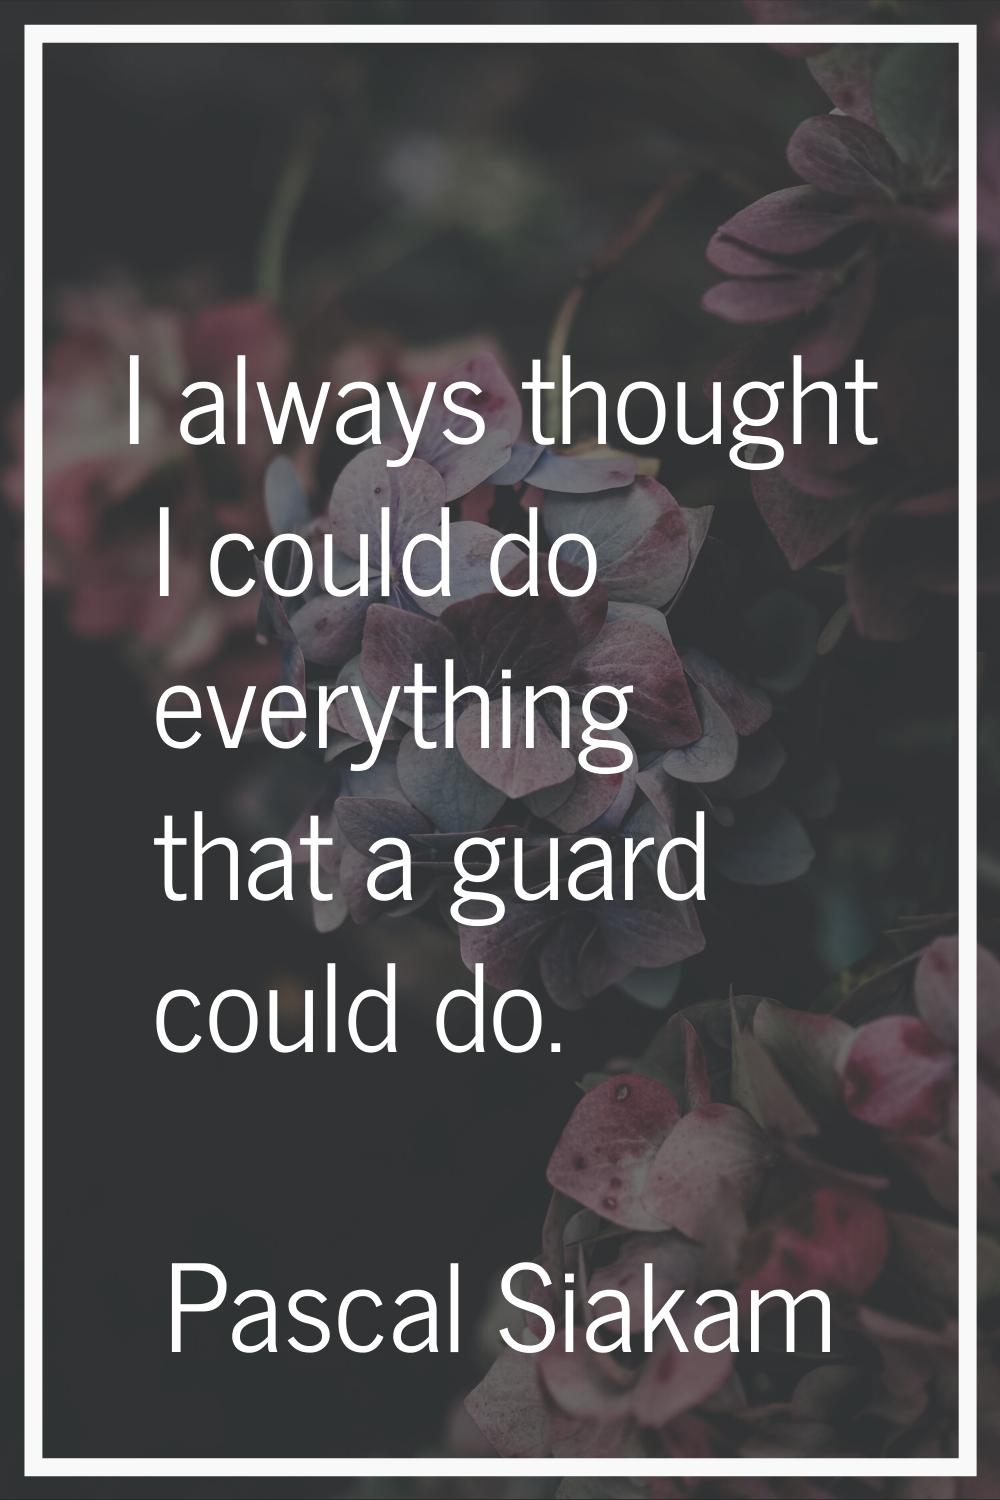 I always thought I could do everything that a guard could do.